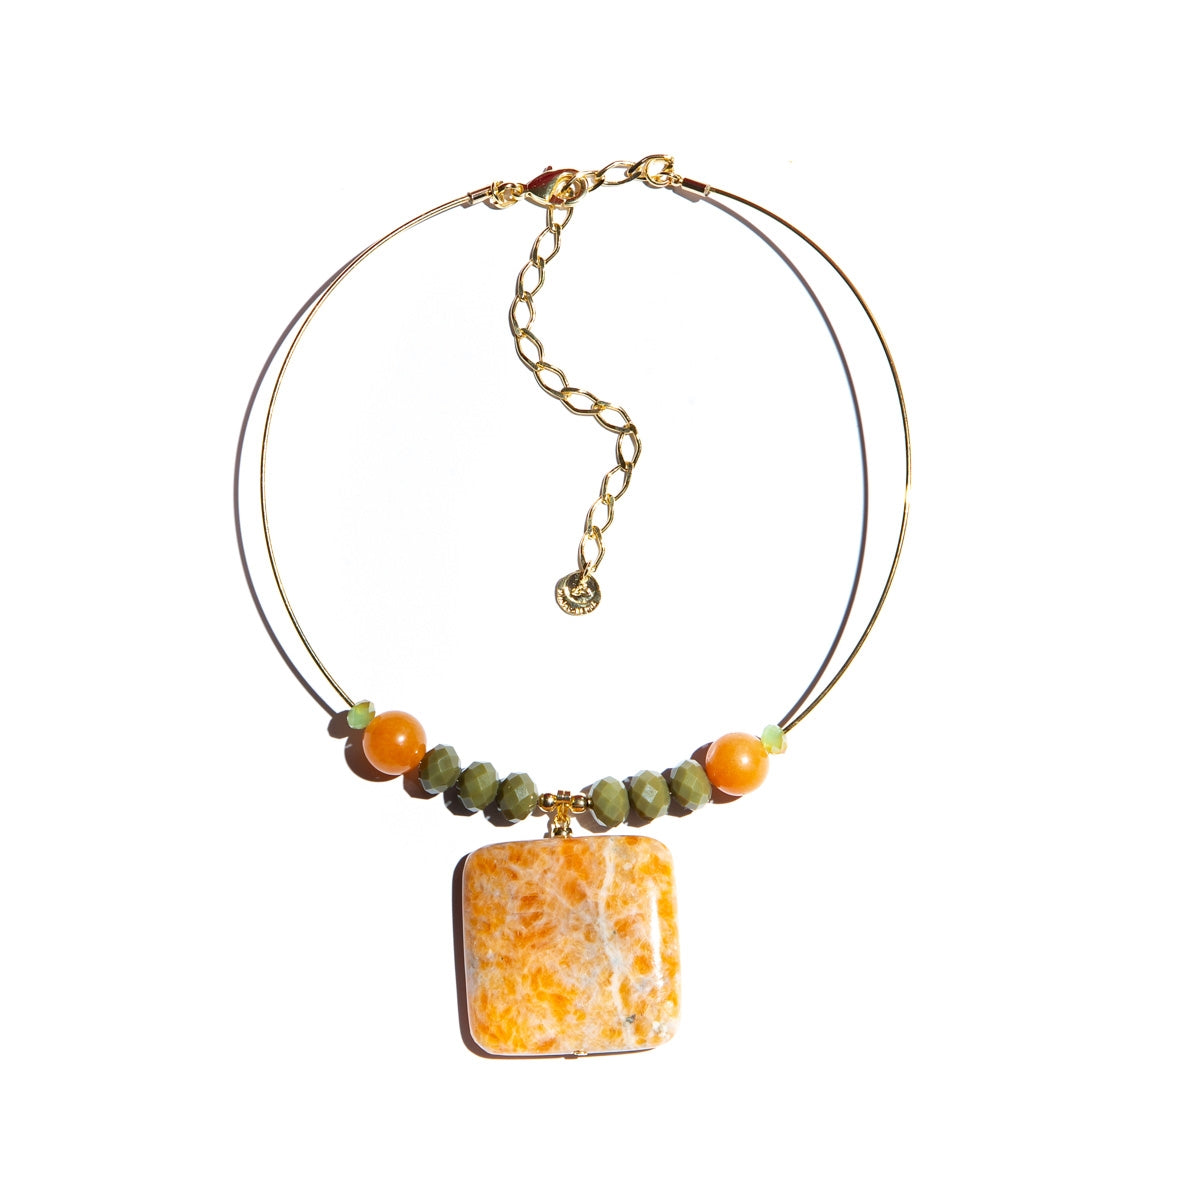 Calcite hoop necklace adorned with crystals and gold-plated metals